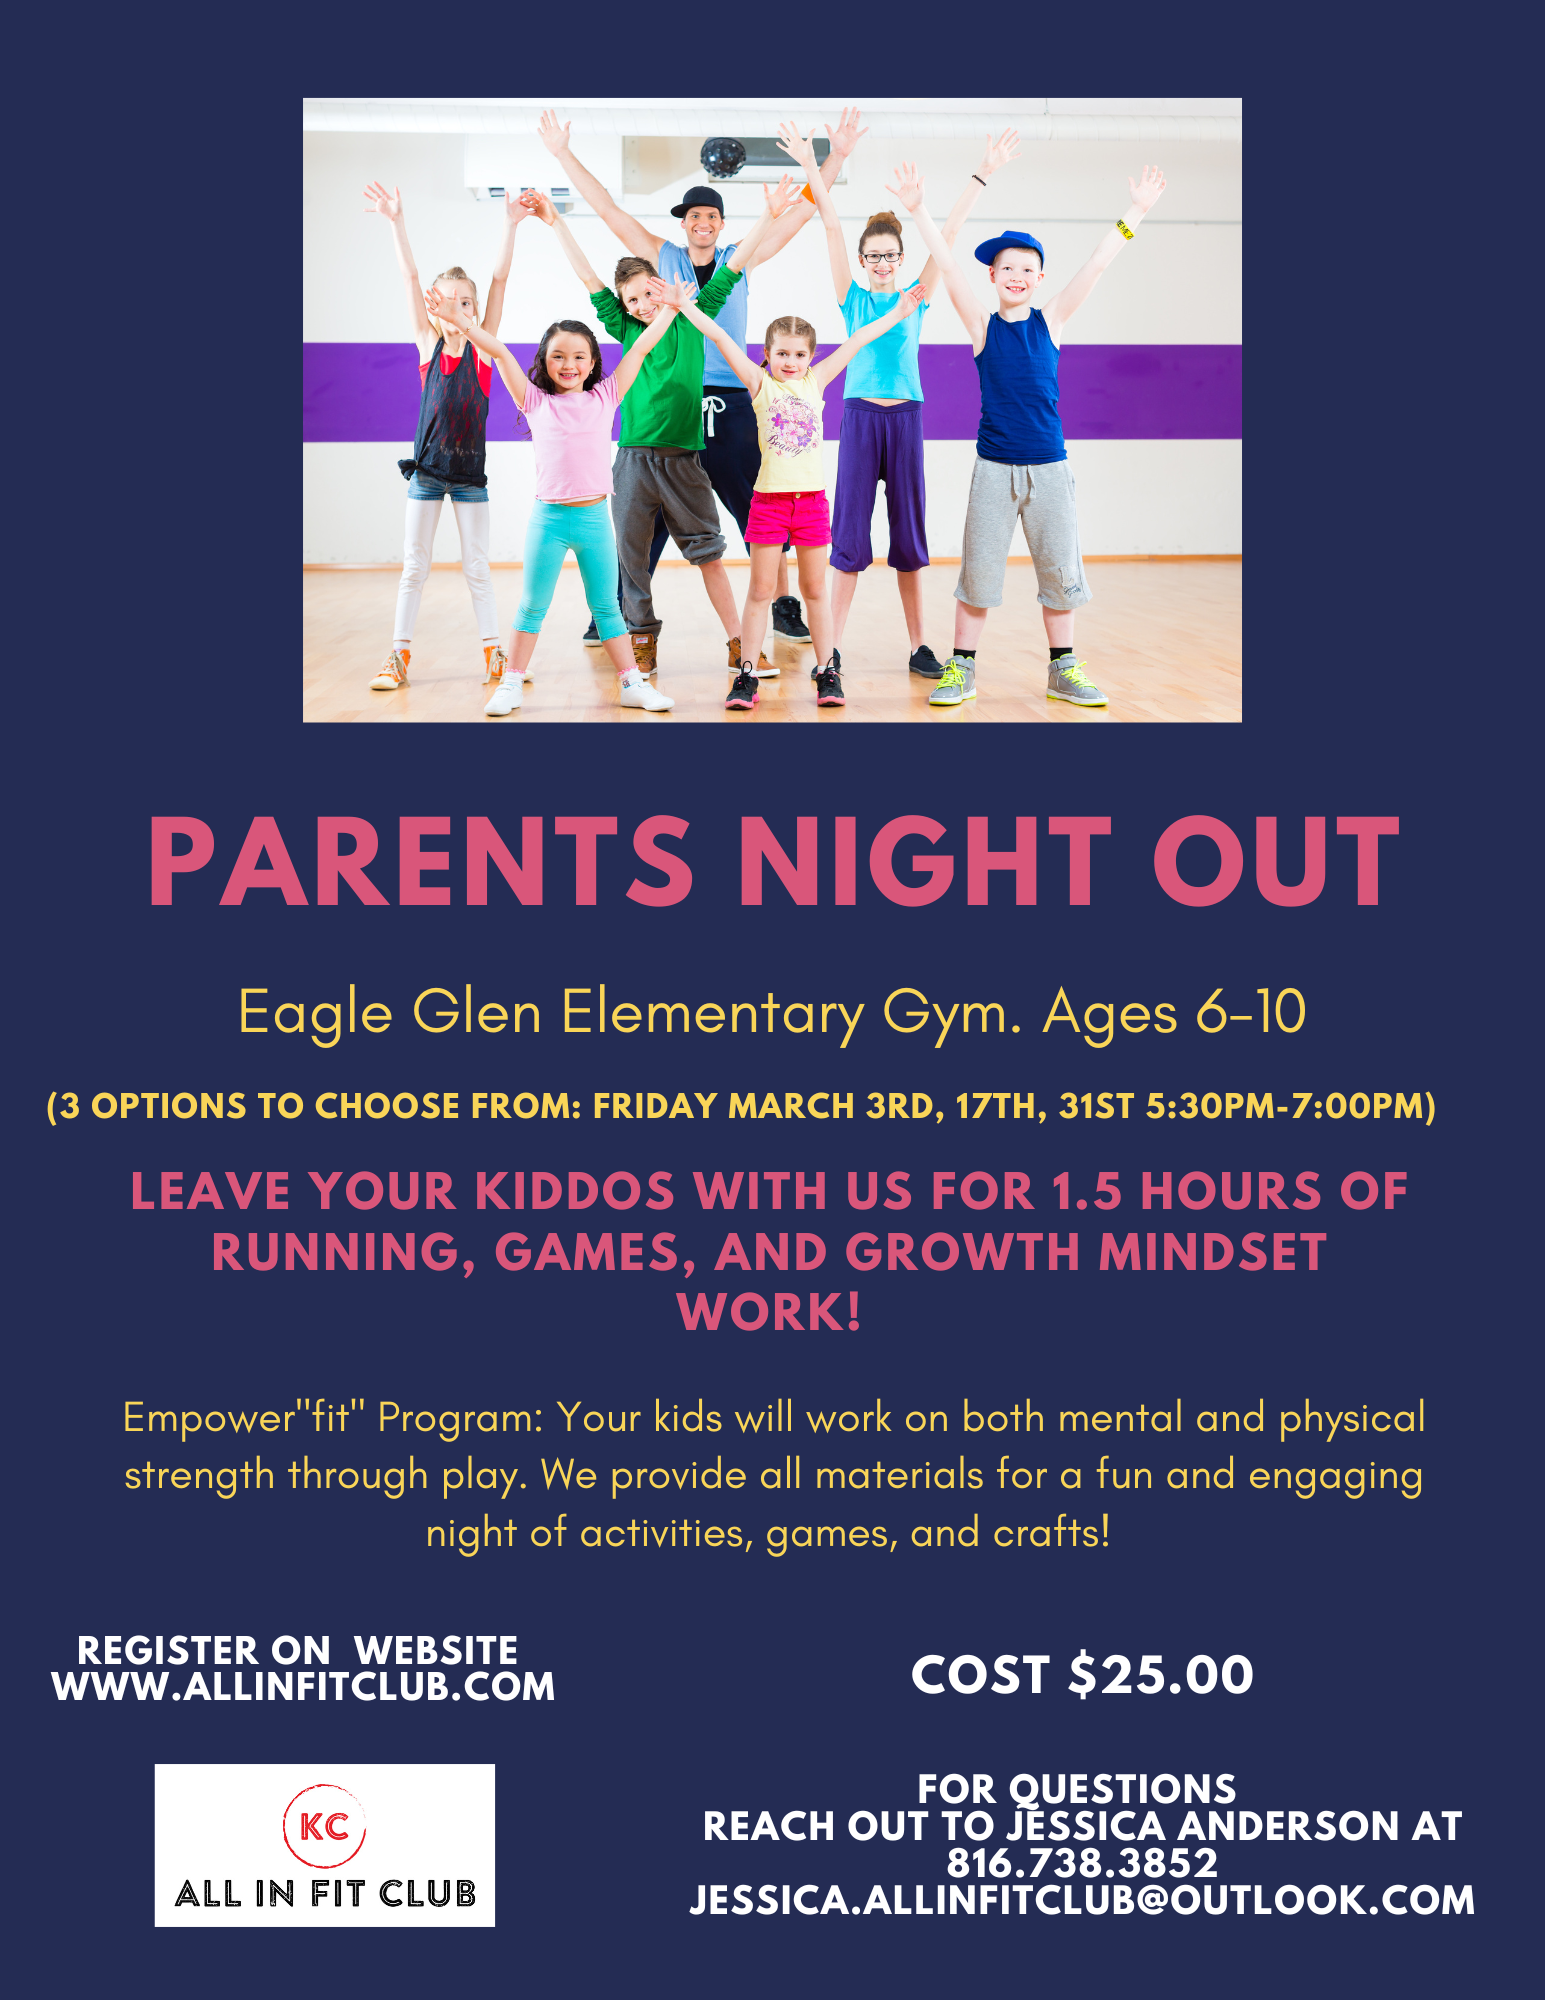 Parents Night Out Flyer